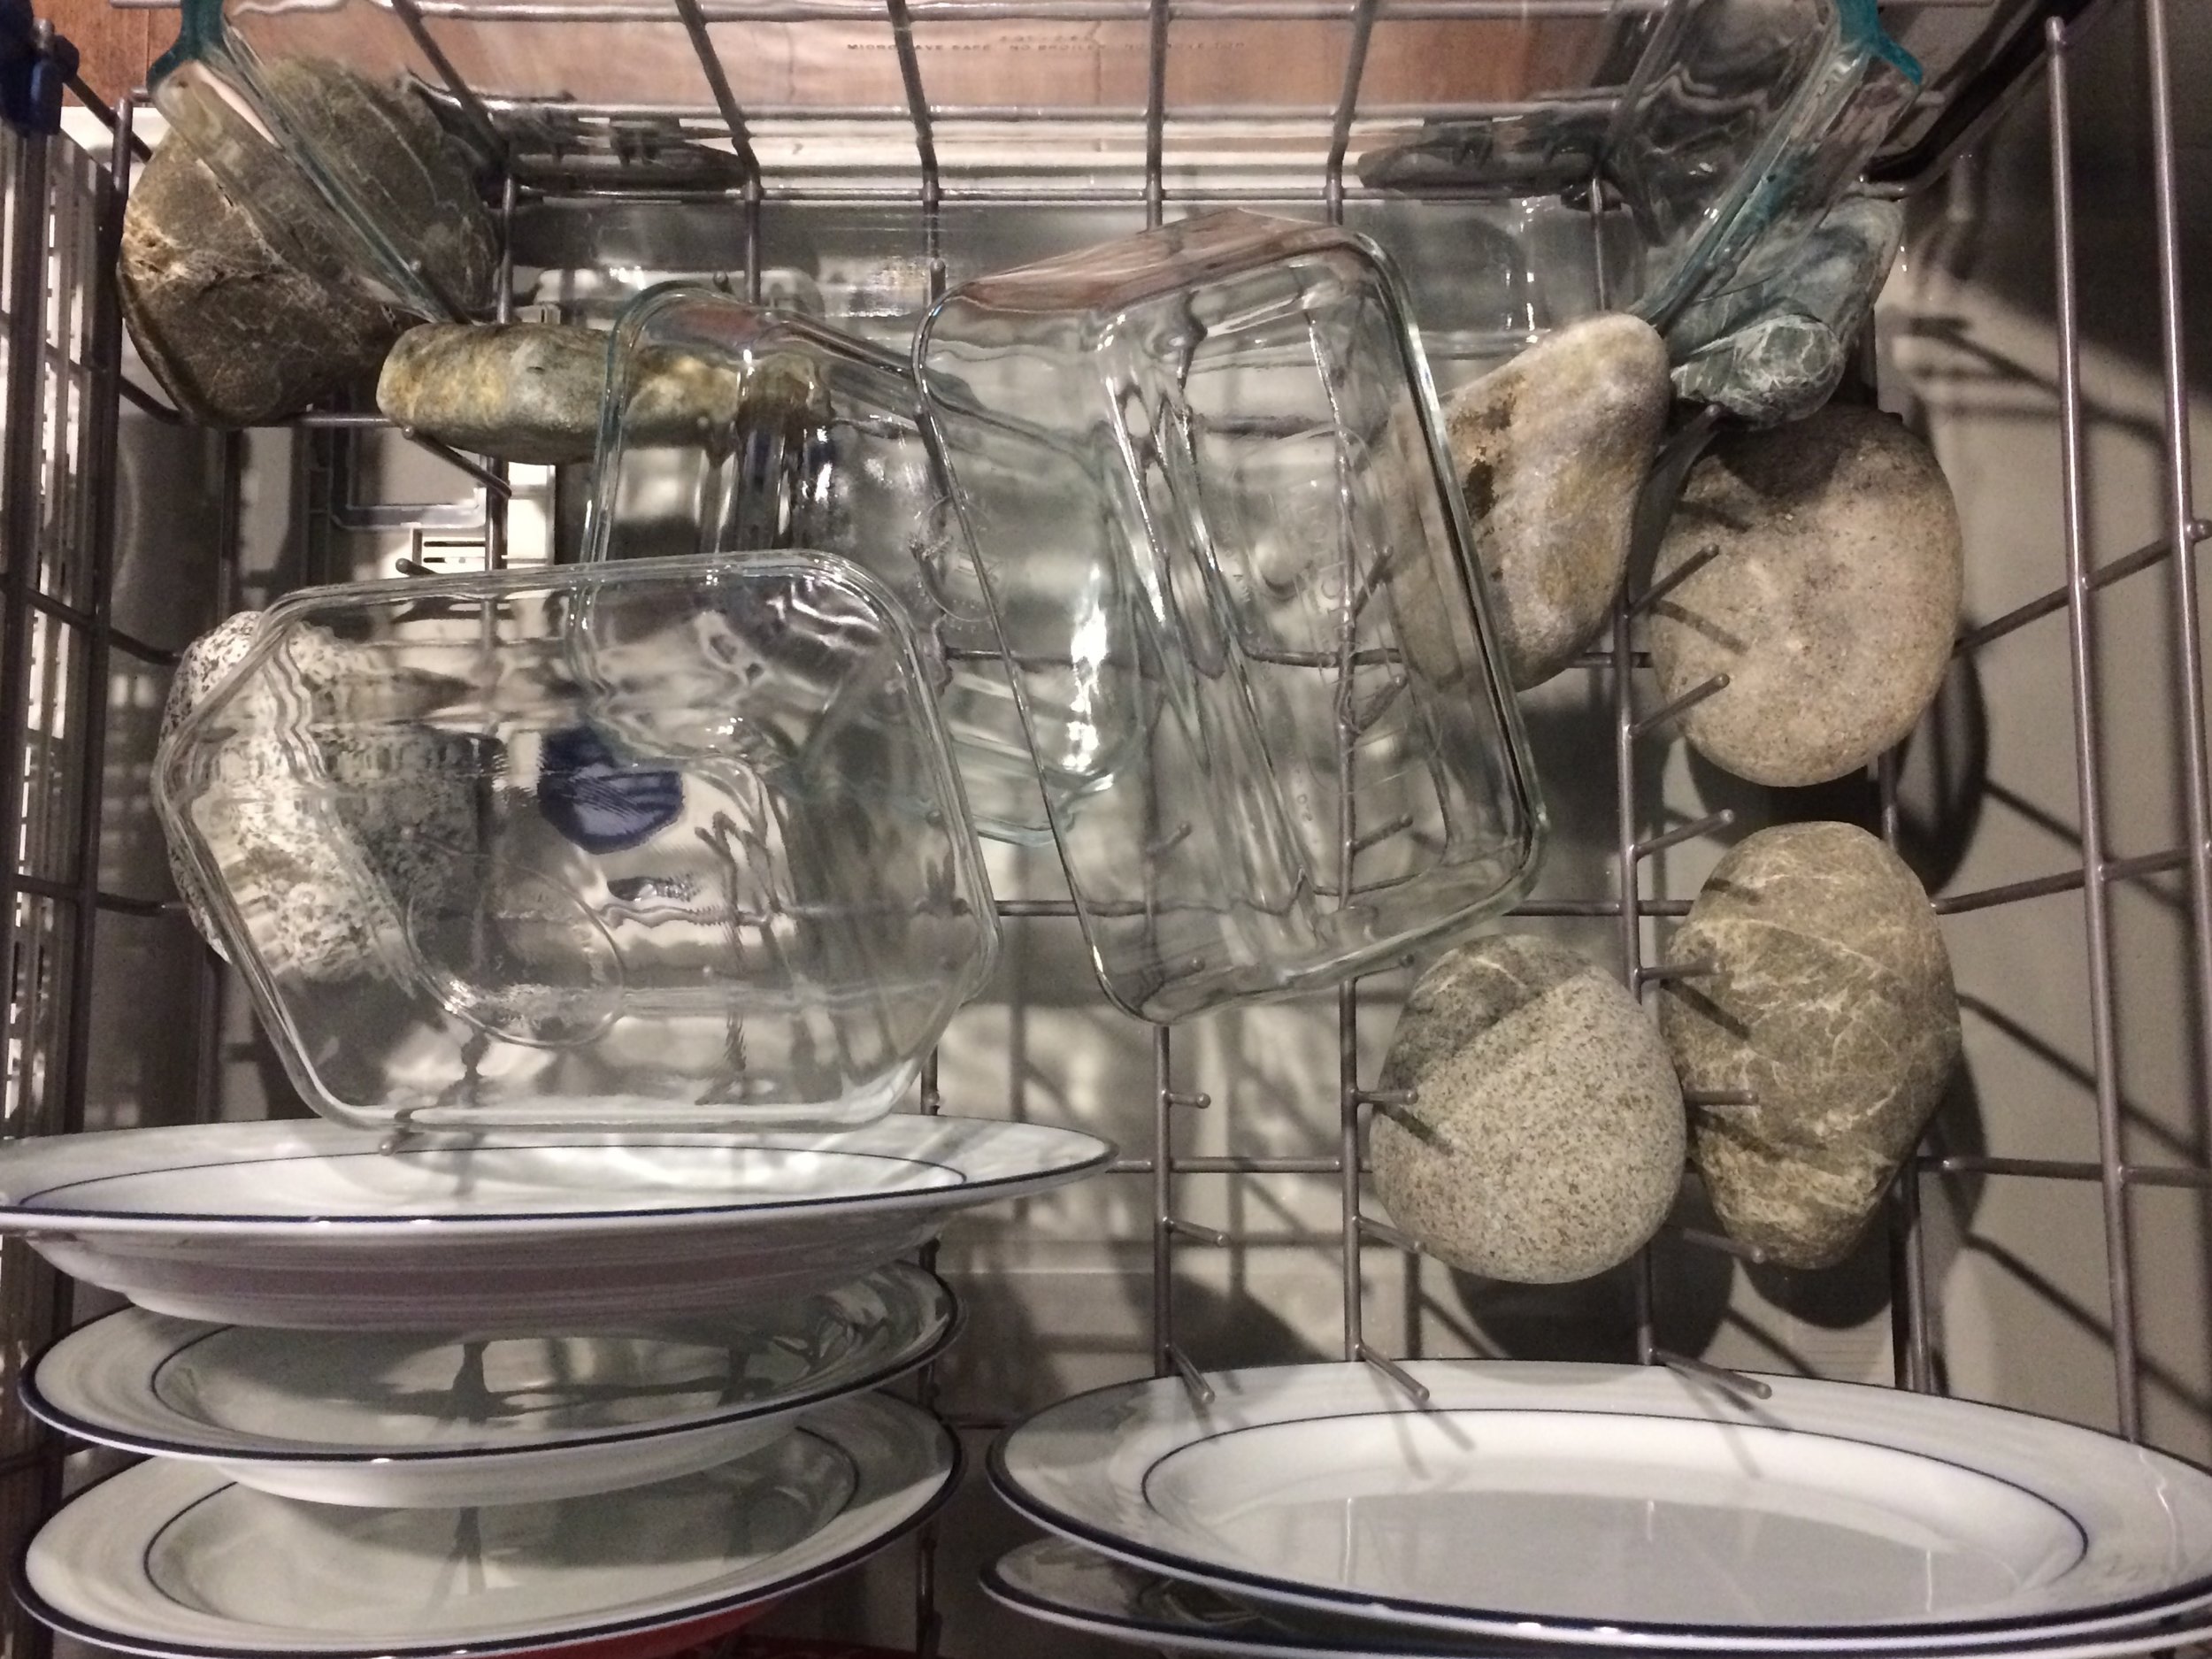 what, you don't put rocks in your dishwasher?